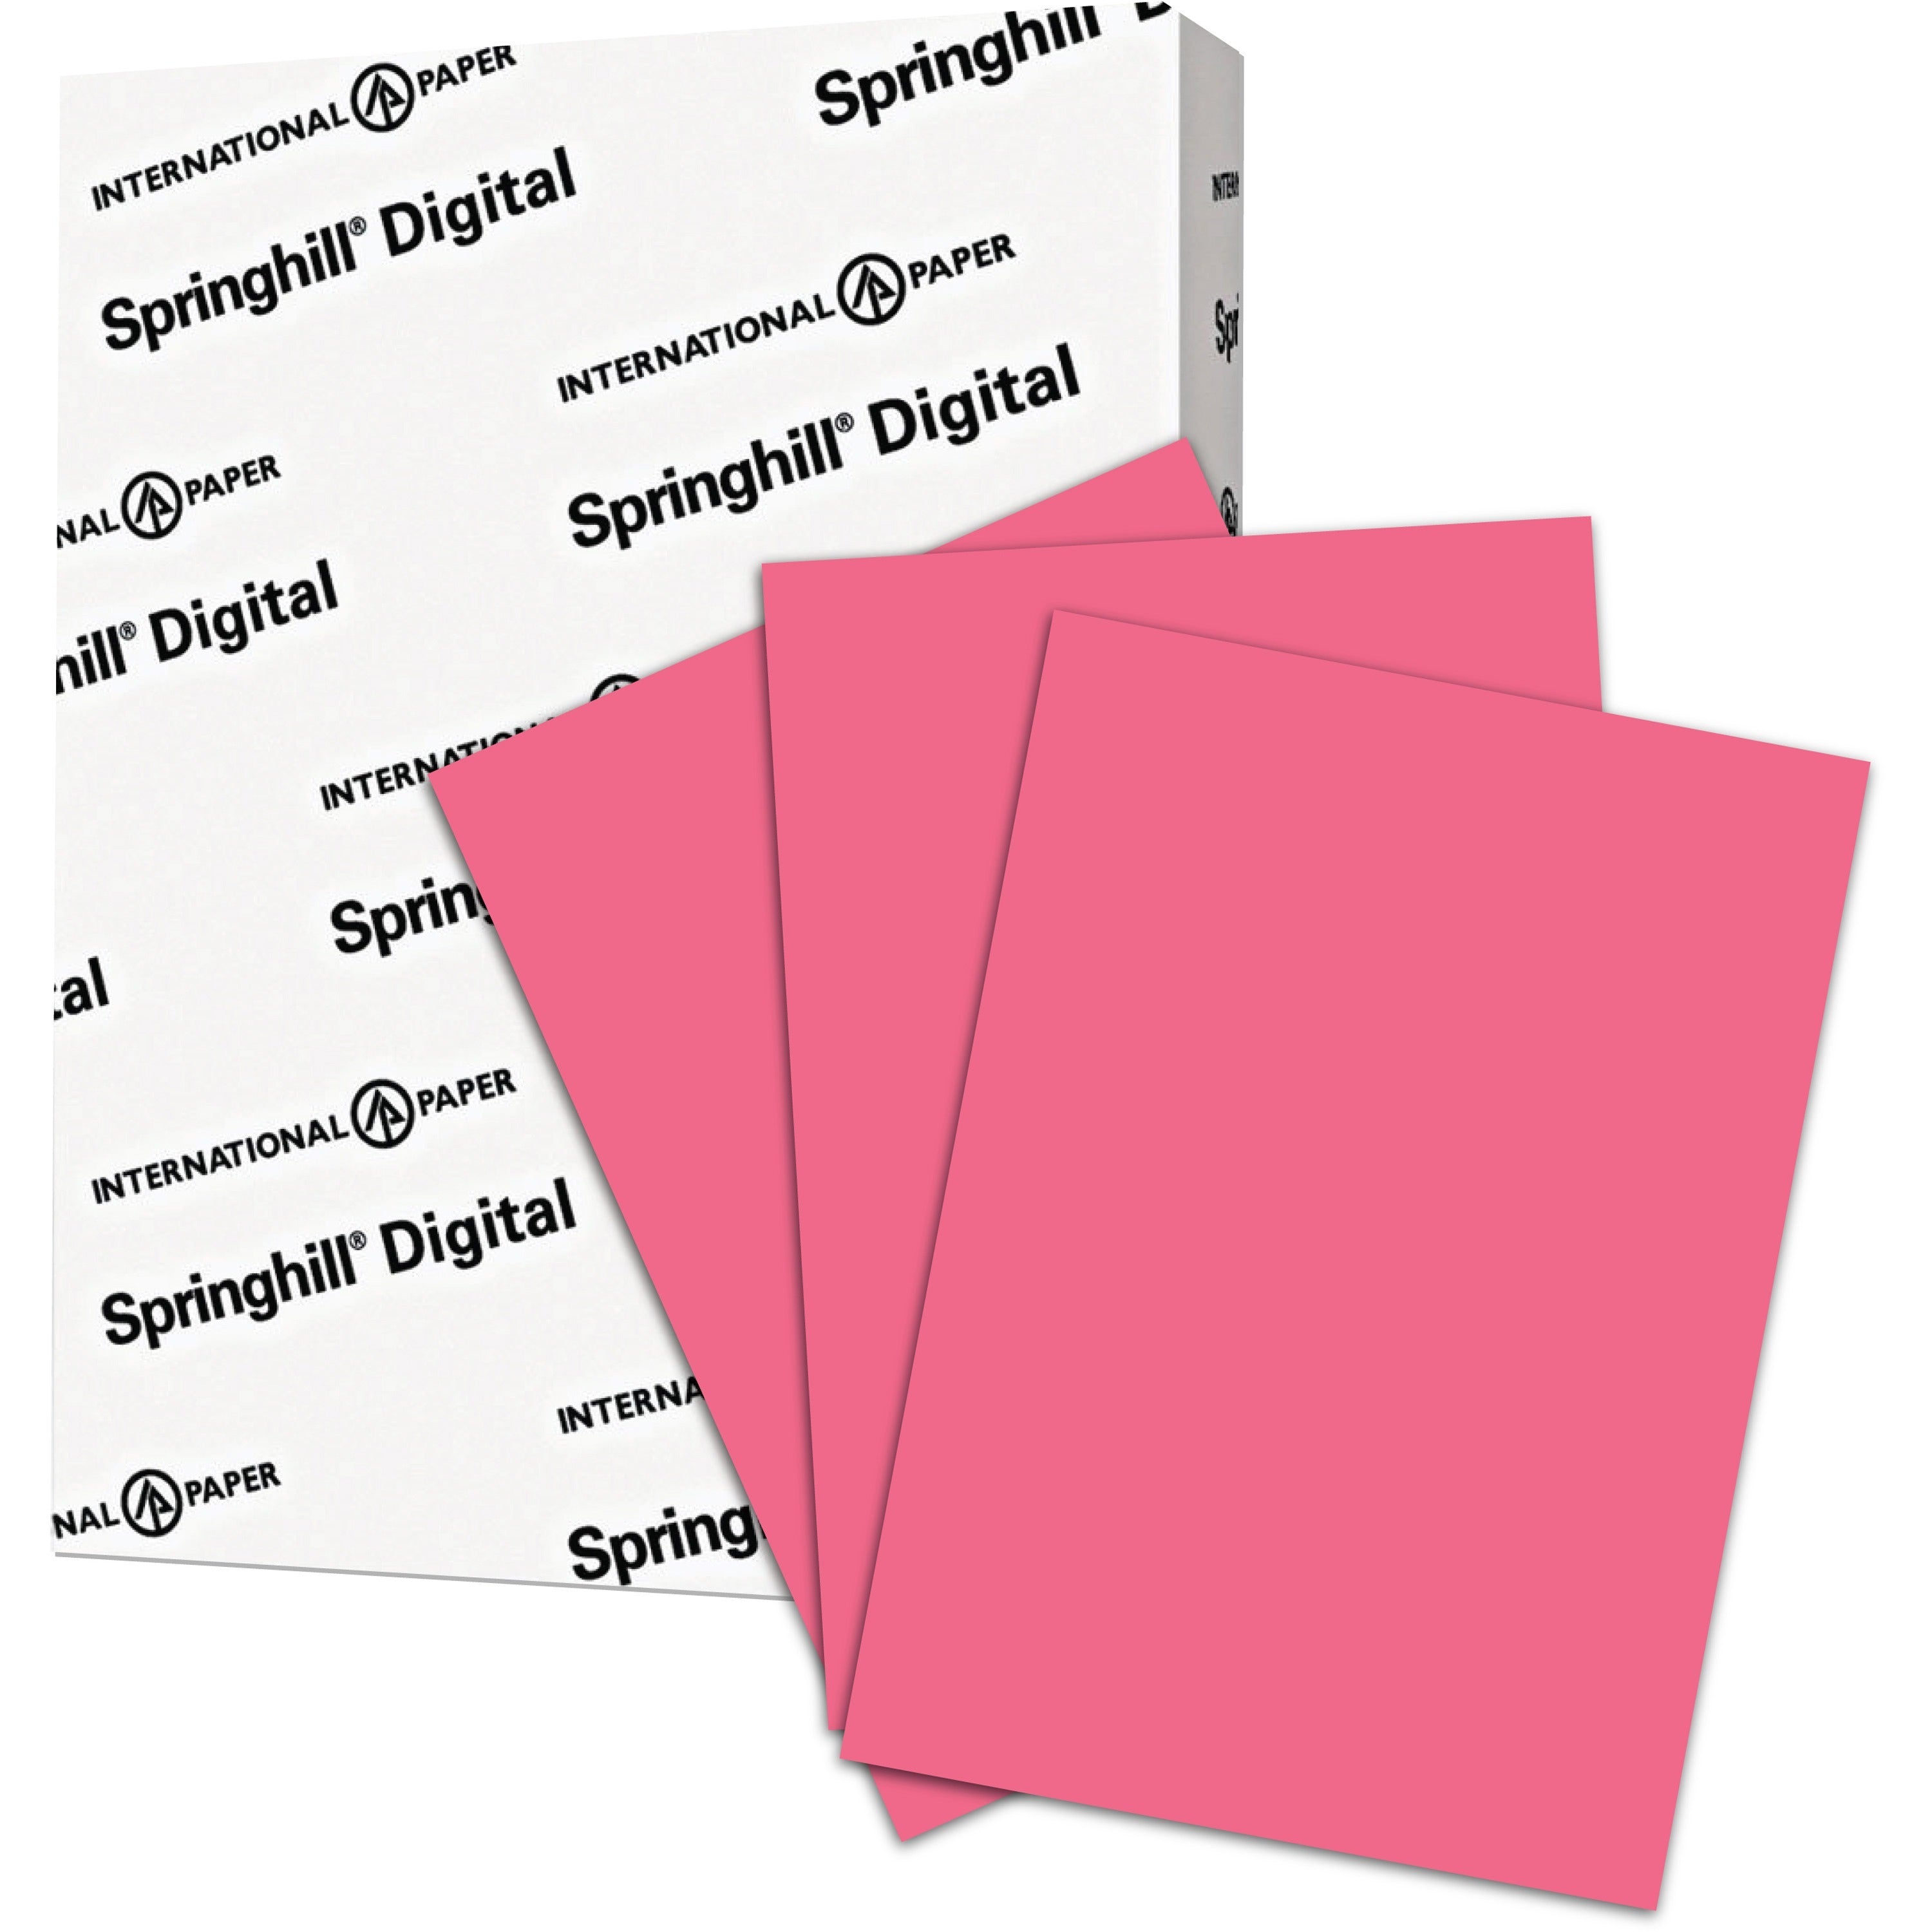 Springhill Multipurpose Cardstock - Cherry - 92 Brightness - Letter - 8 1/2" x 11" - 110 lb Basis Weight - Smooth - 250 / Pack - Cherry - 